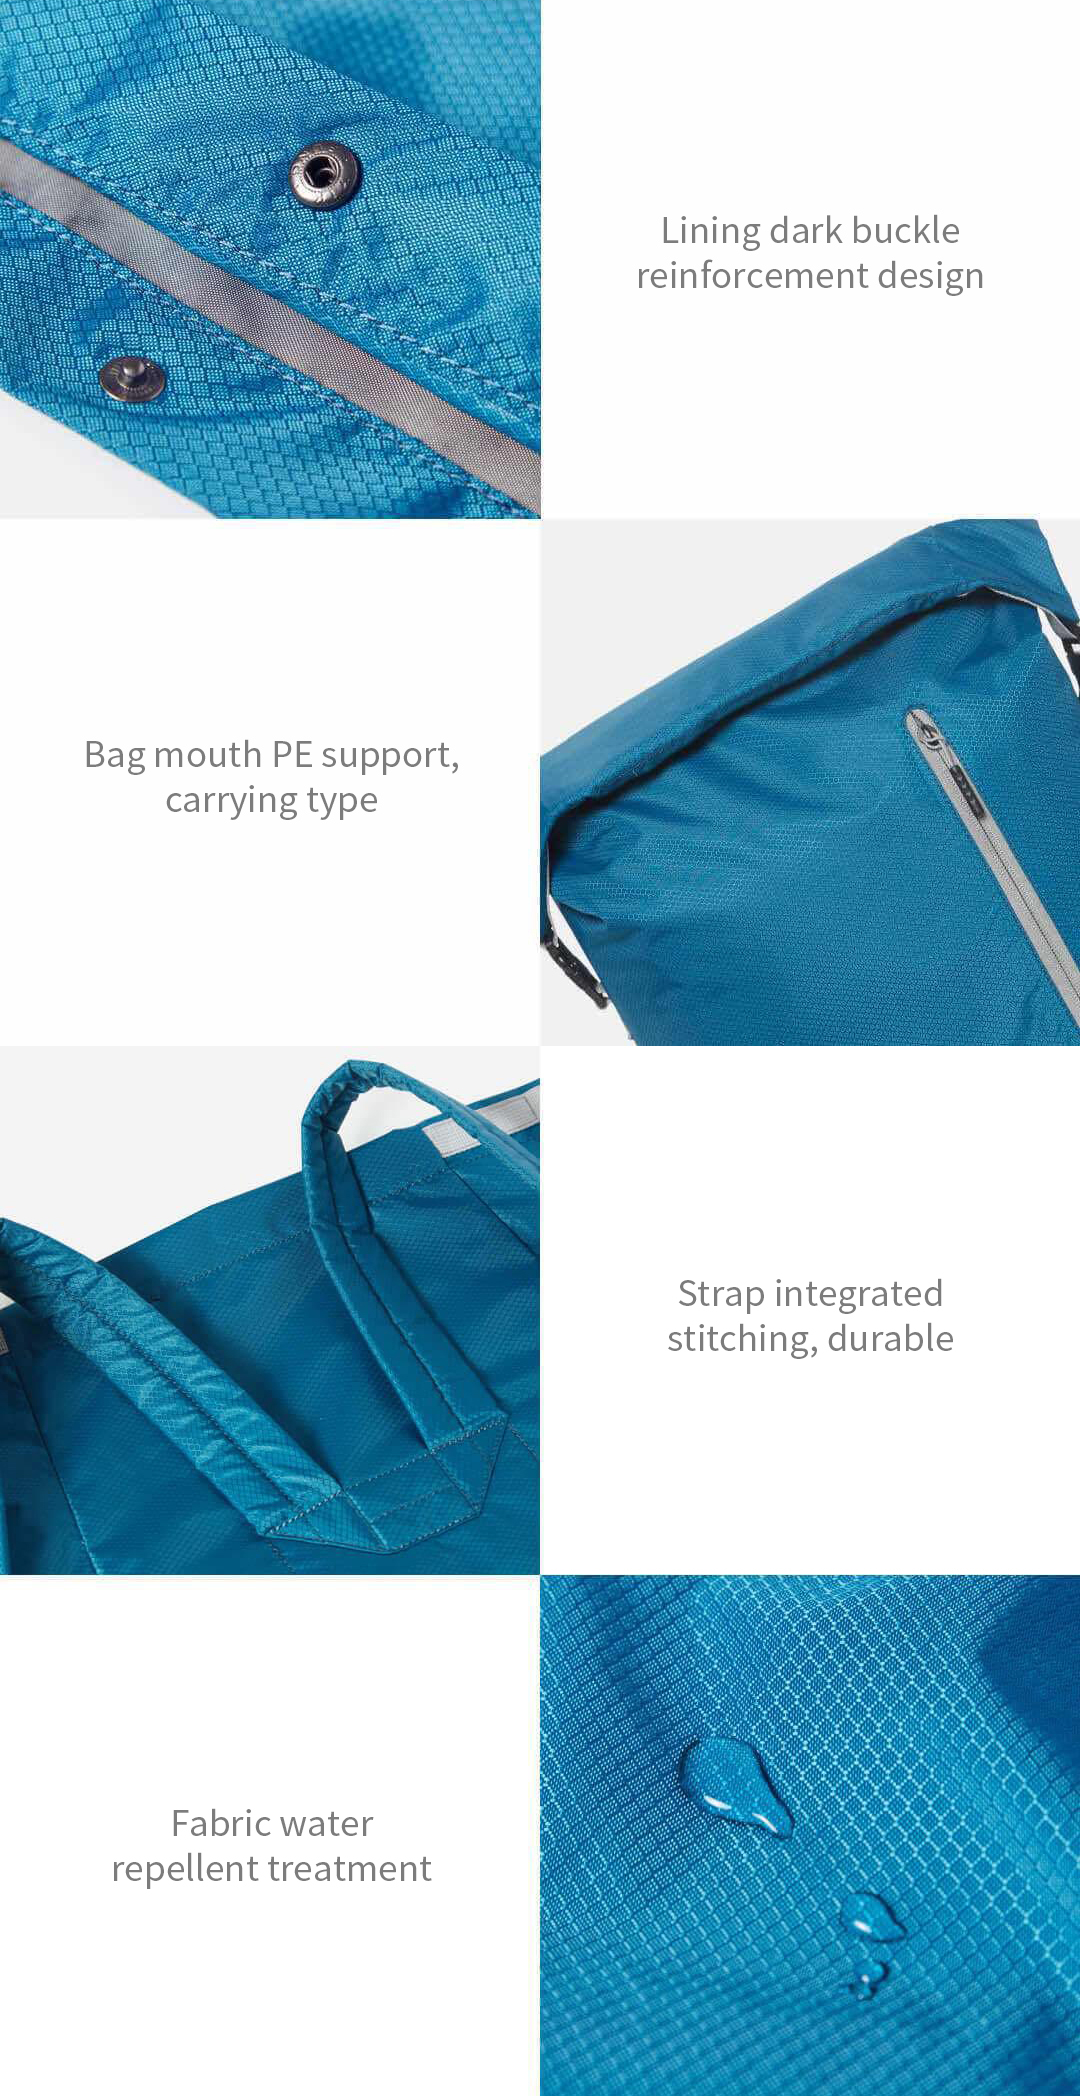 Outdoor-Backpack-Lightweight-Sports-Folding-Bag-Portable-Camping-Hiking-School-Bag-from-XIAOMI-YOUPI-1504212-7